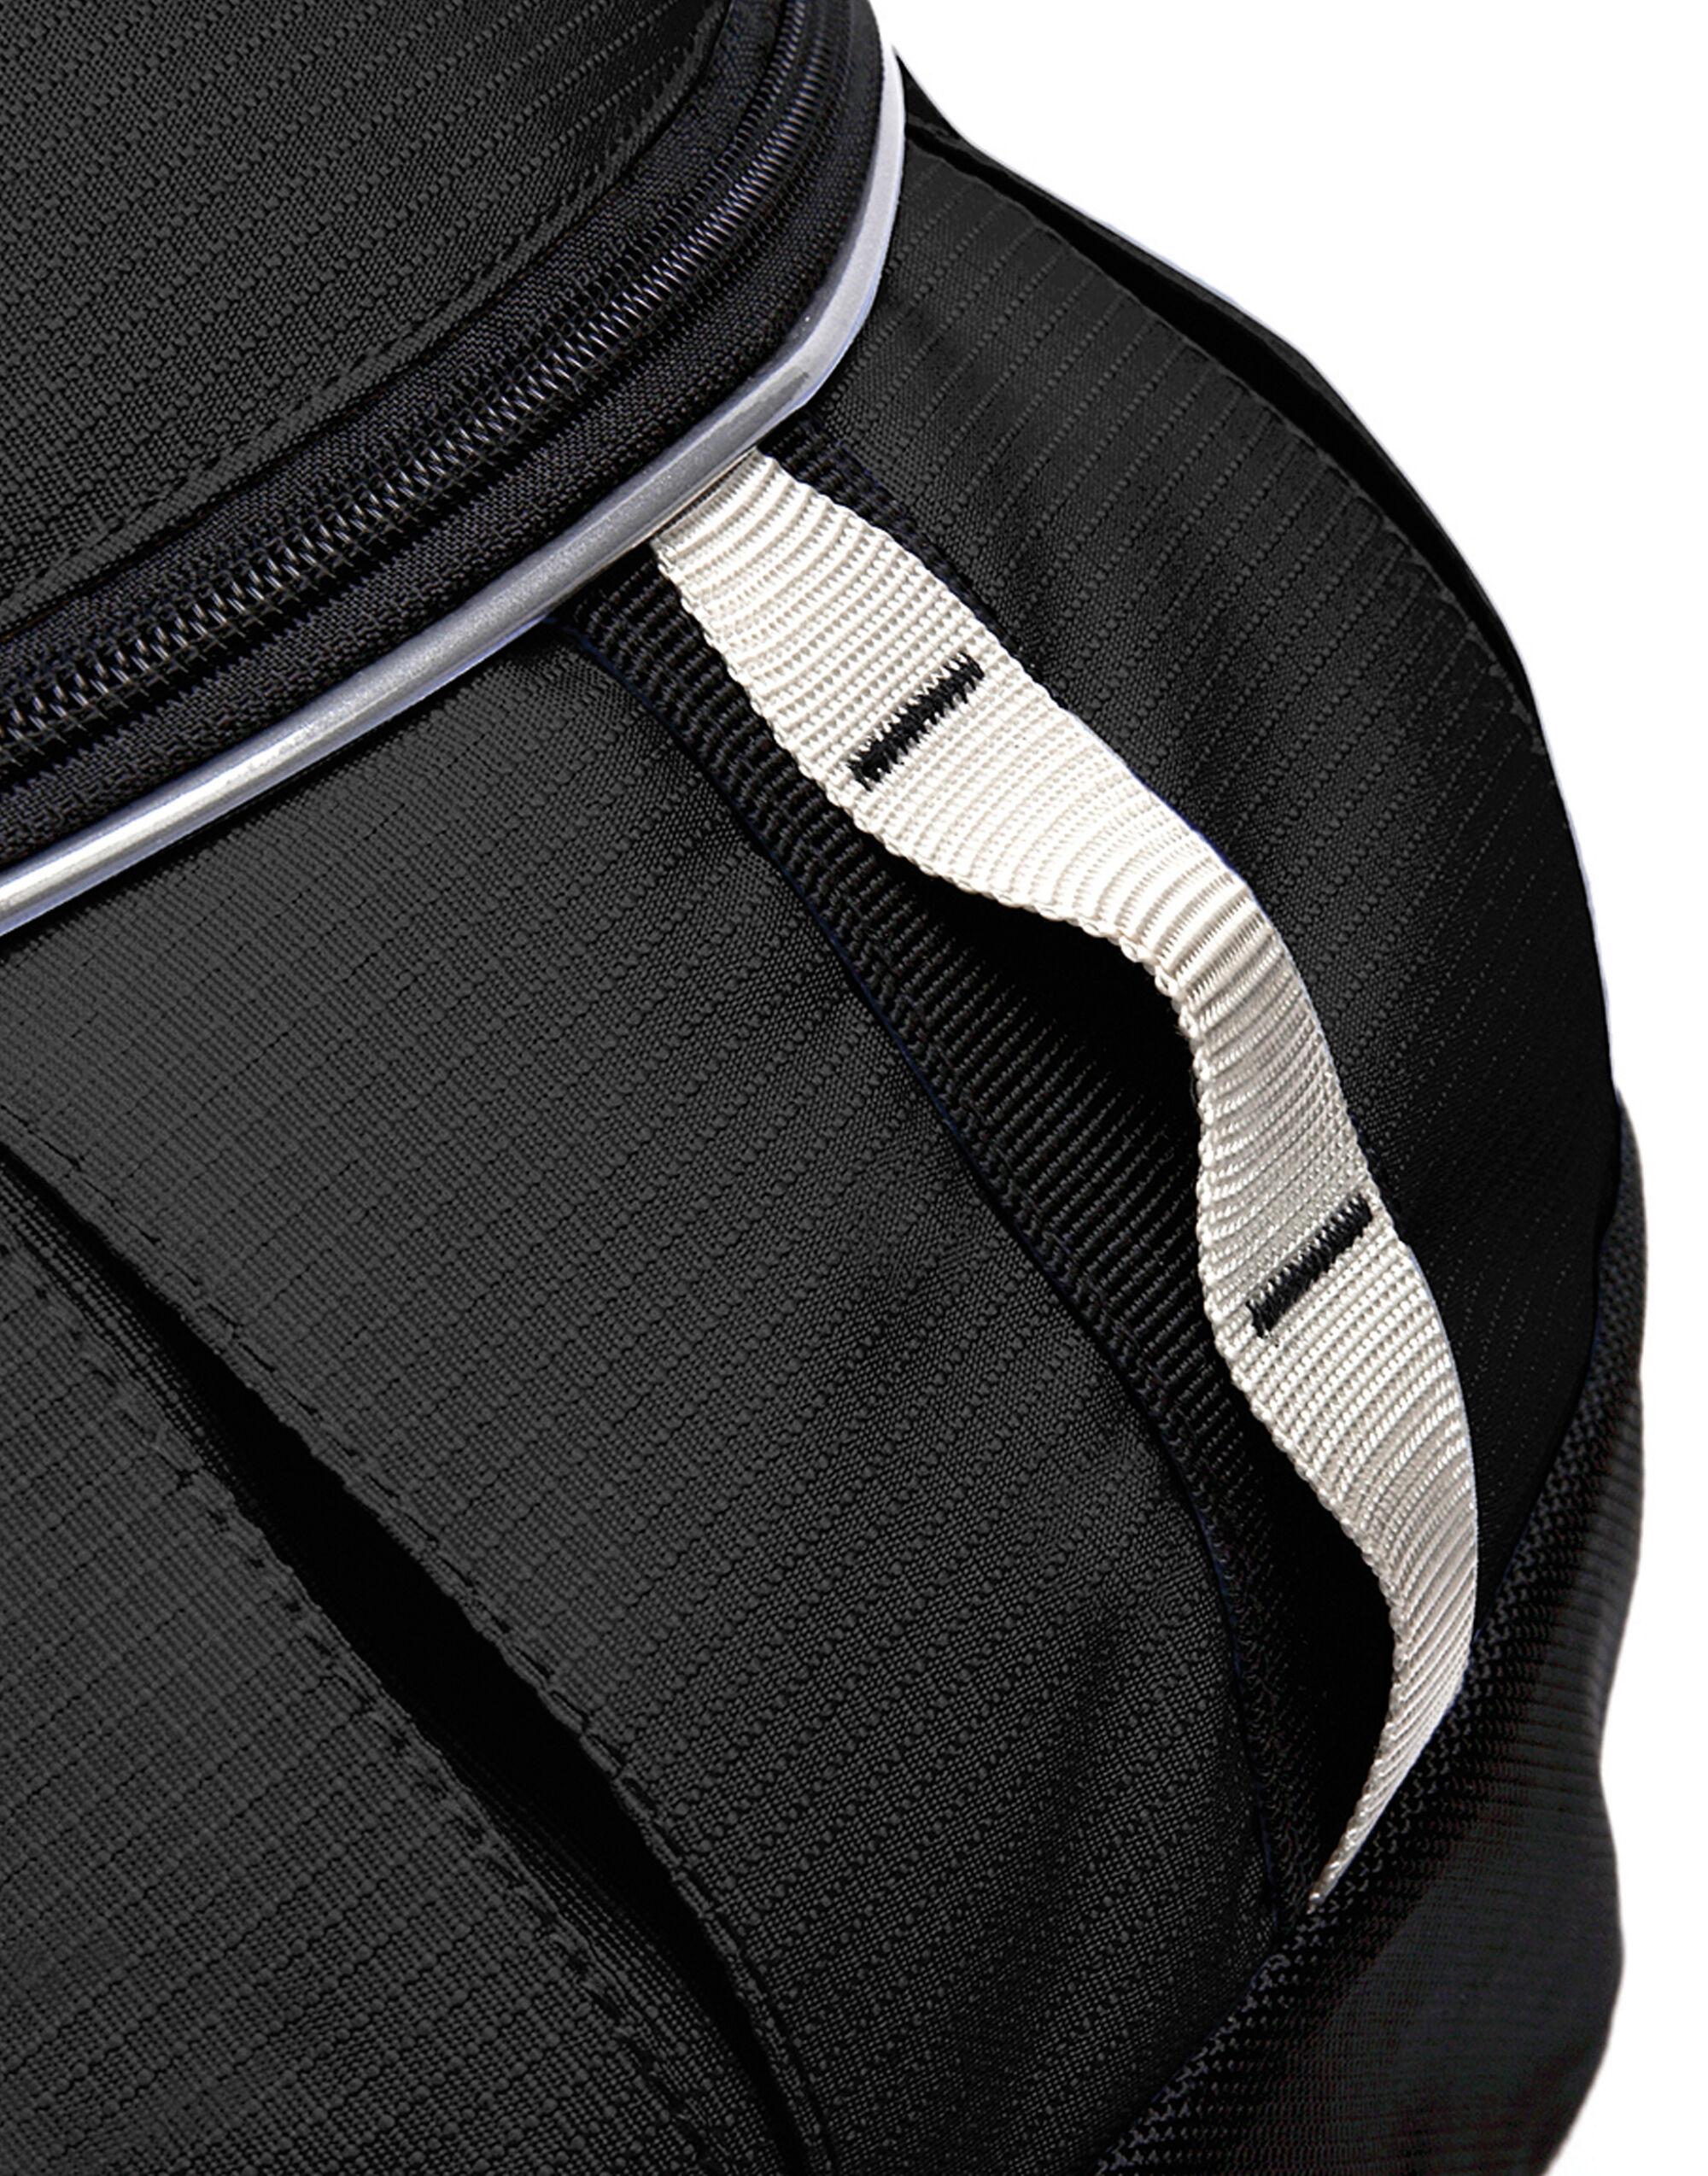 Persuit Backpack